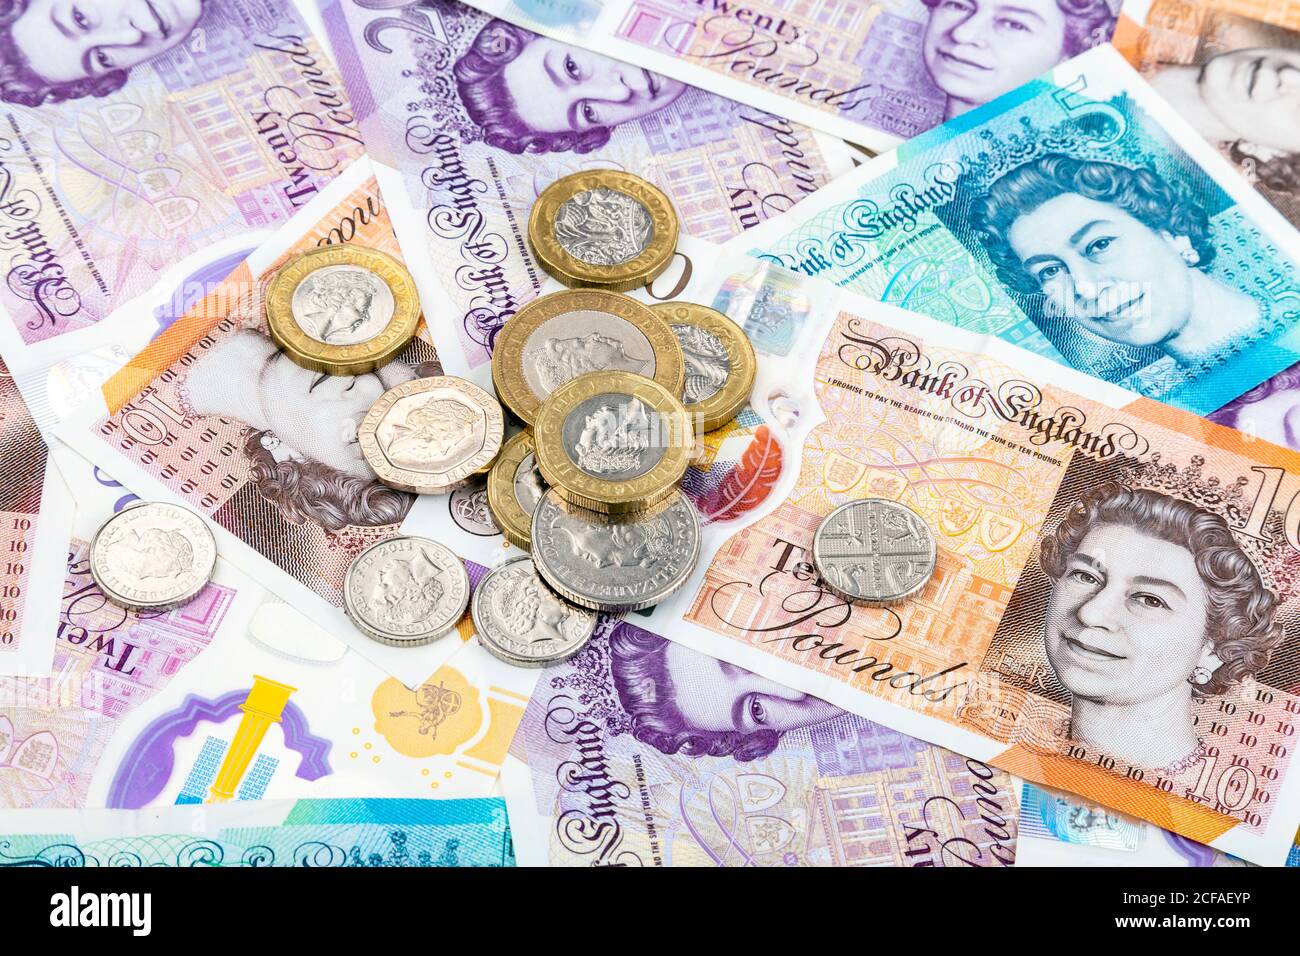 New British pound polymer notes and coins scattered Stock Photo